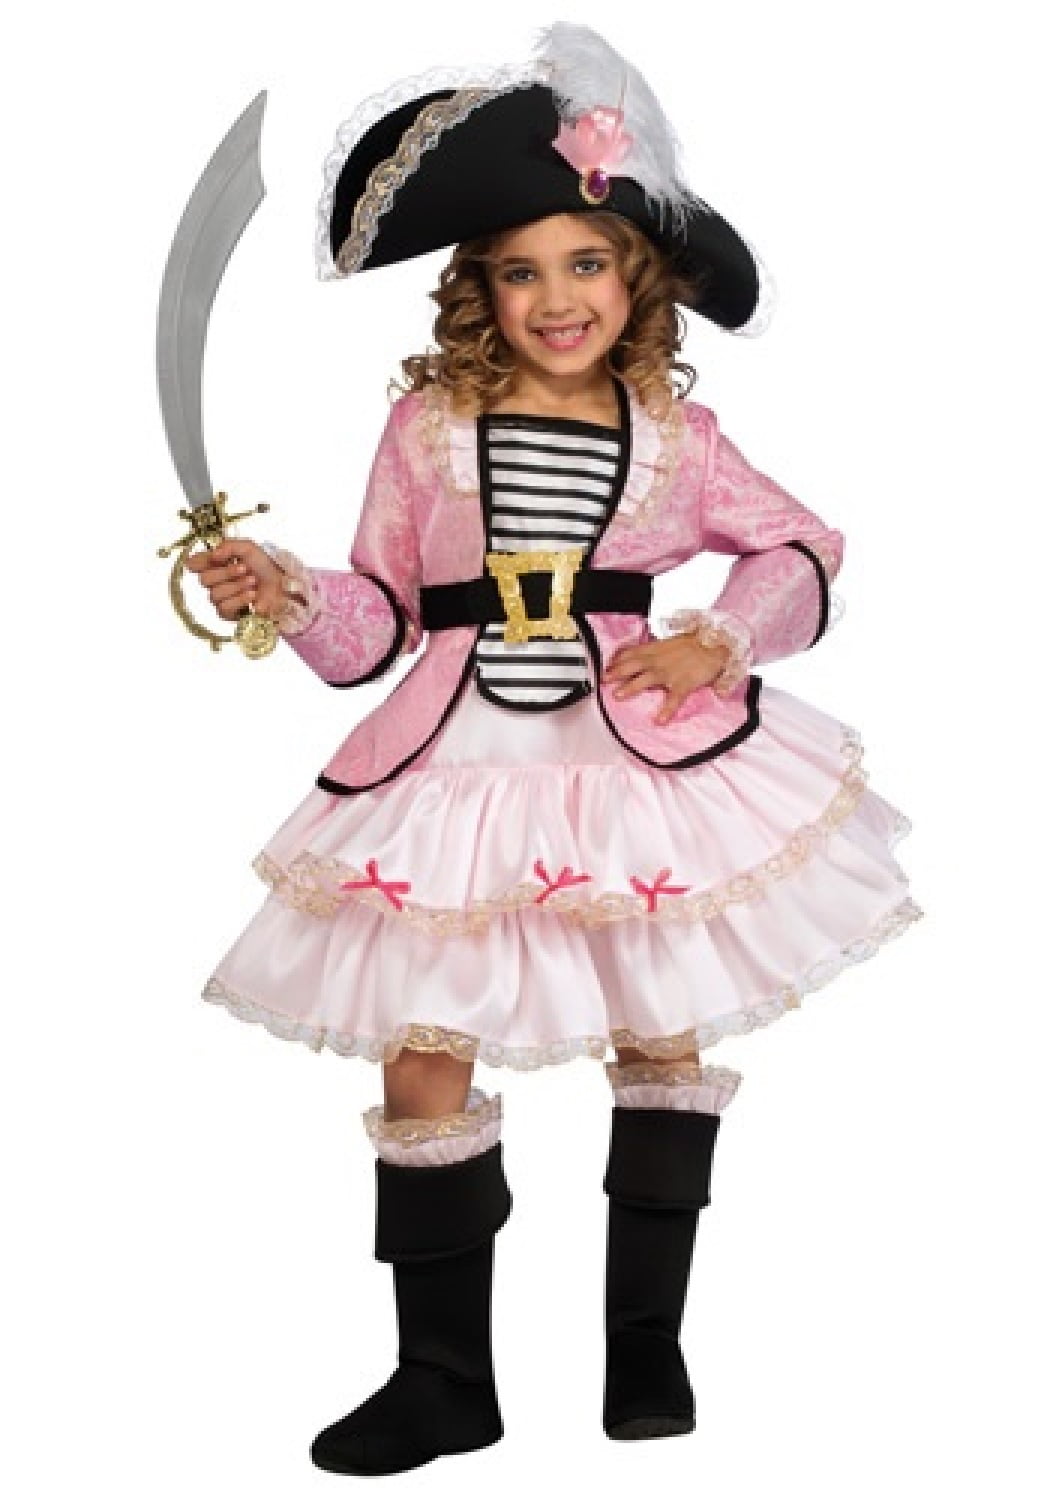 Kids Adult Jumbo Giant Pirate Face Halloween Costume Fancy Dress Party Outfit 